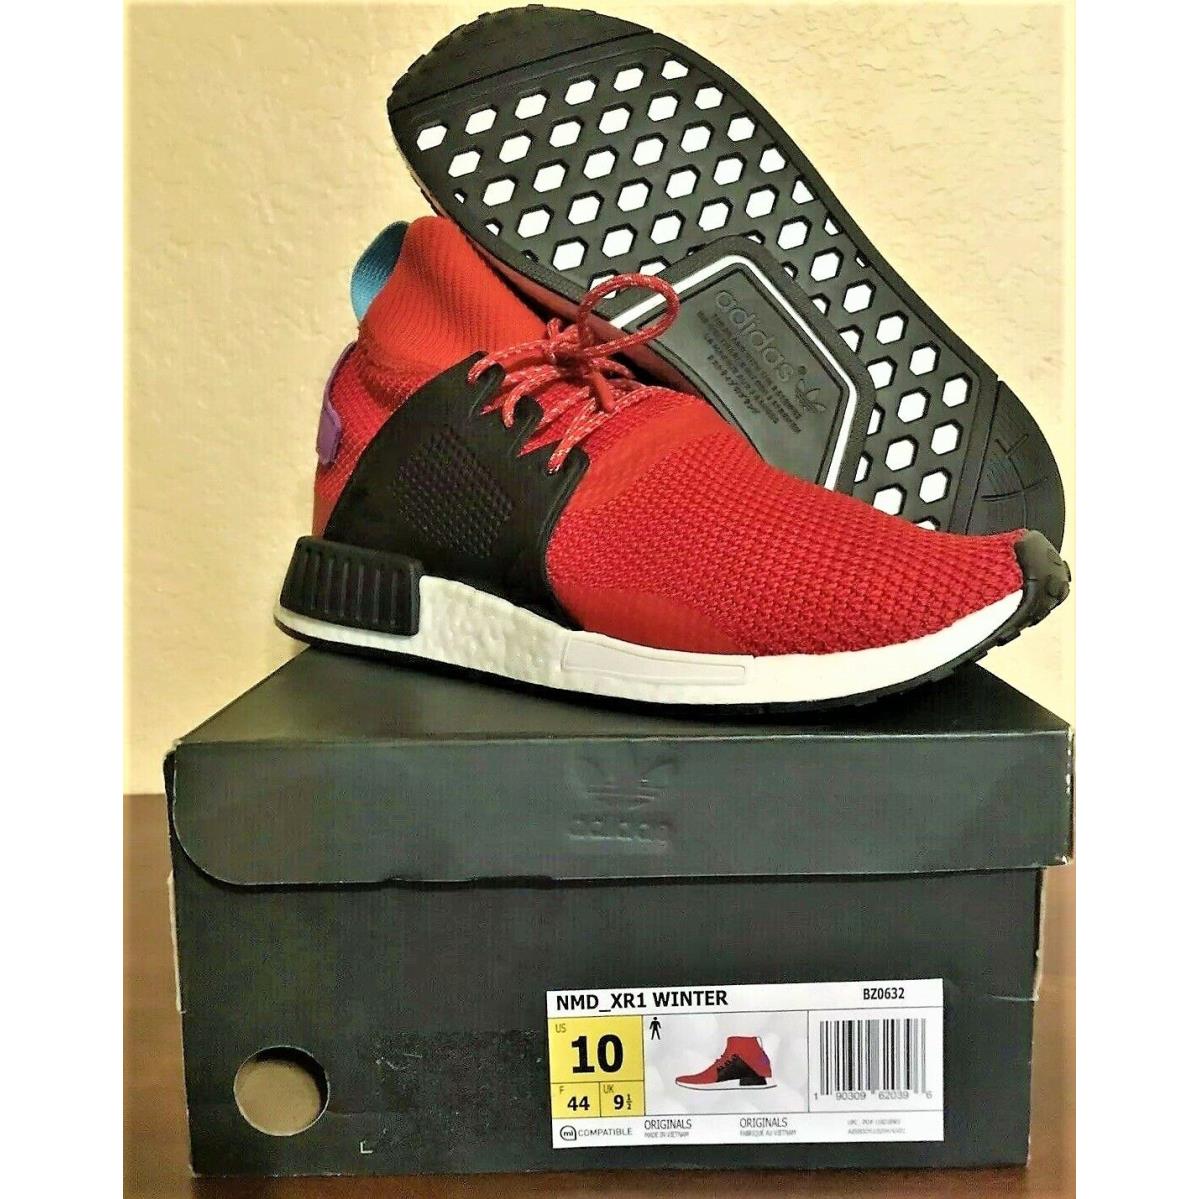 Mira Merecer Electricista Adidas BZ0632 Nmd XR1 Winter Scarlet Red Boost Men`s Running Shoes 10M |  190309620396 - Adidas shoes - Red | SporTipTop